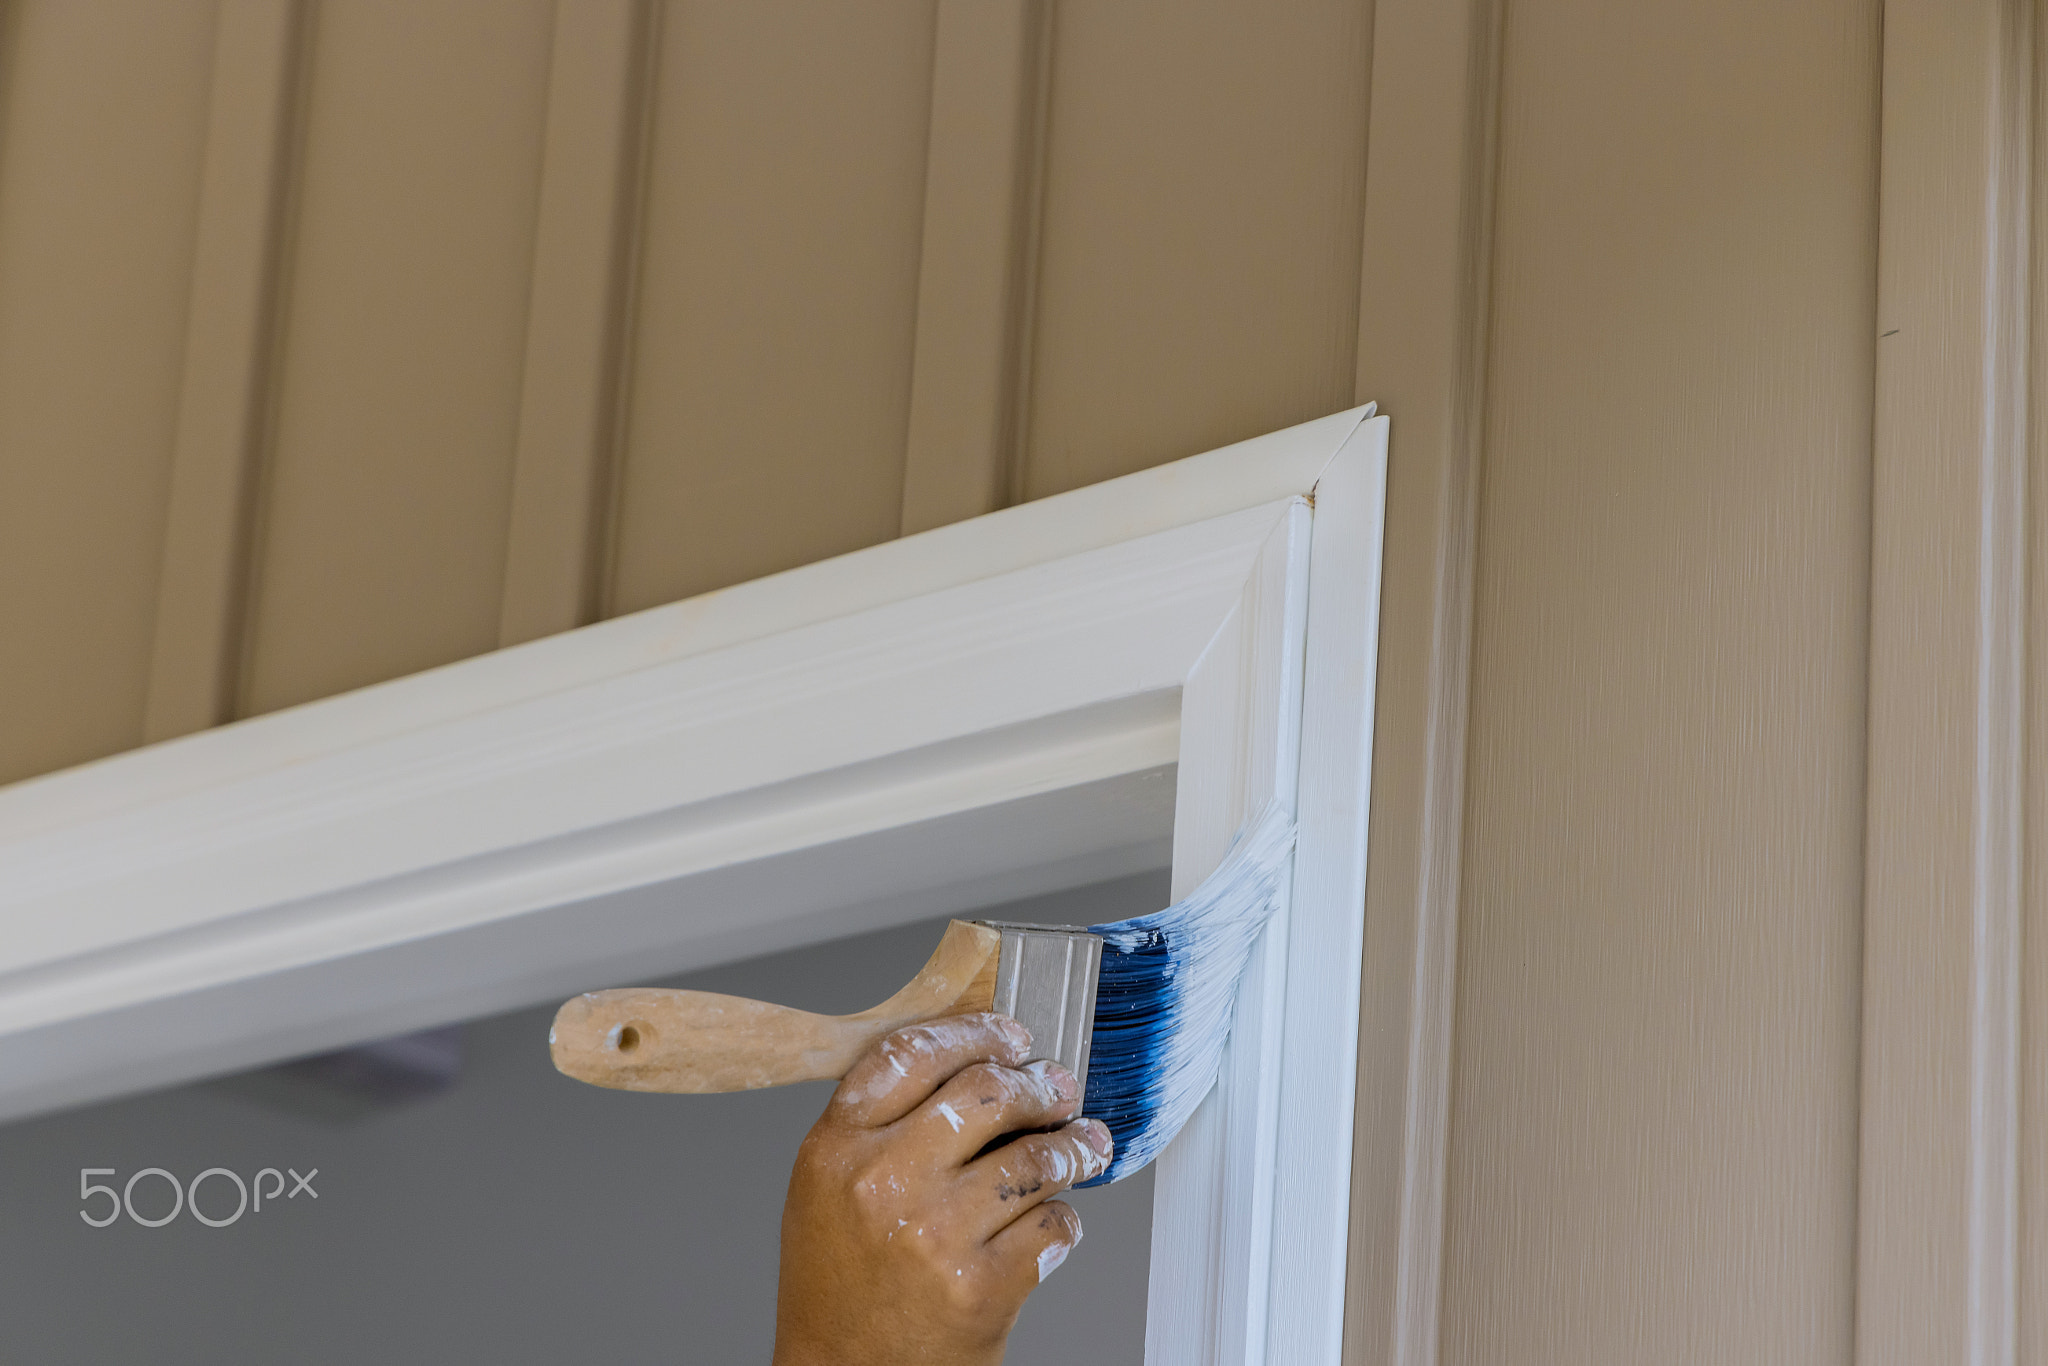 Using a paintbrush, a carpenter works on painting wooden moldings and